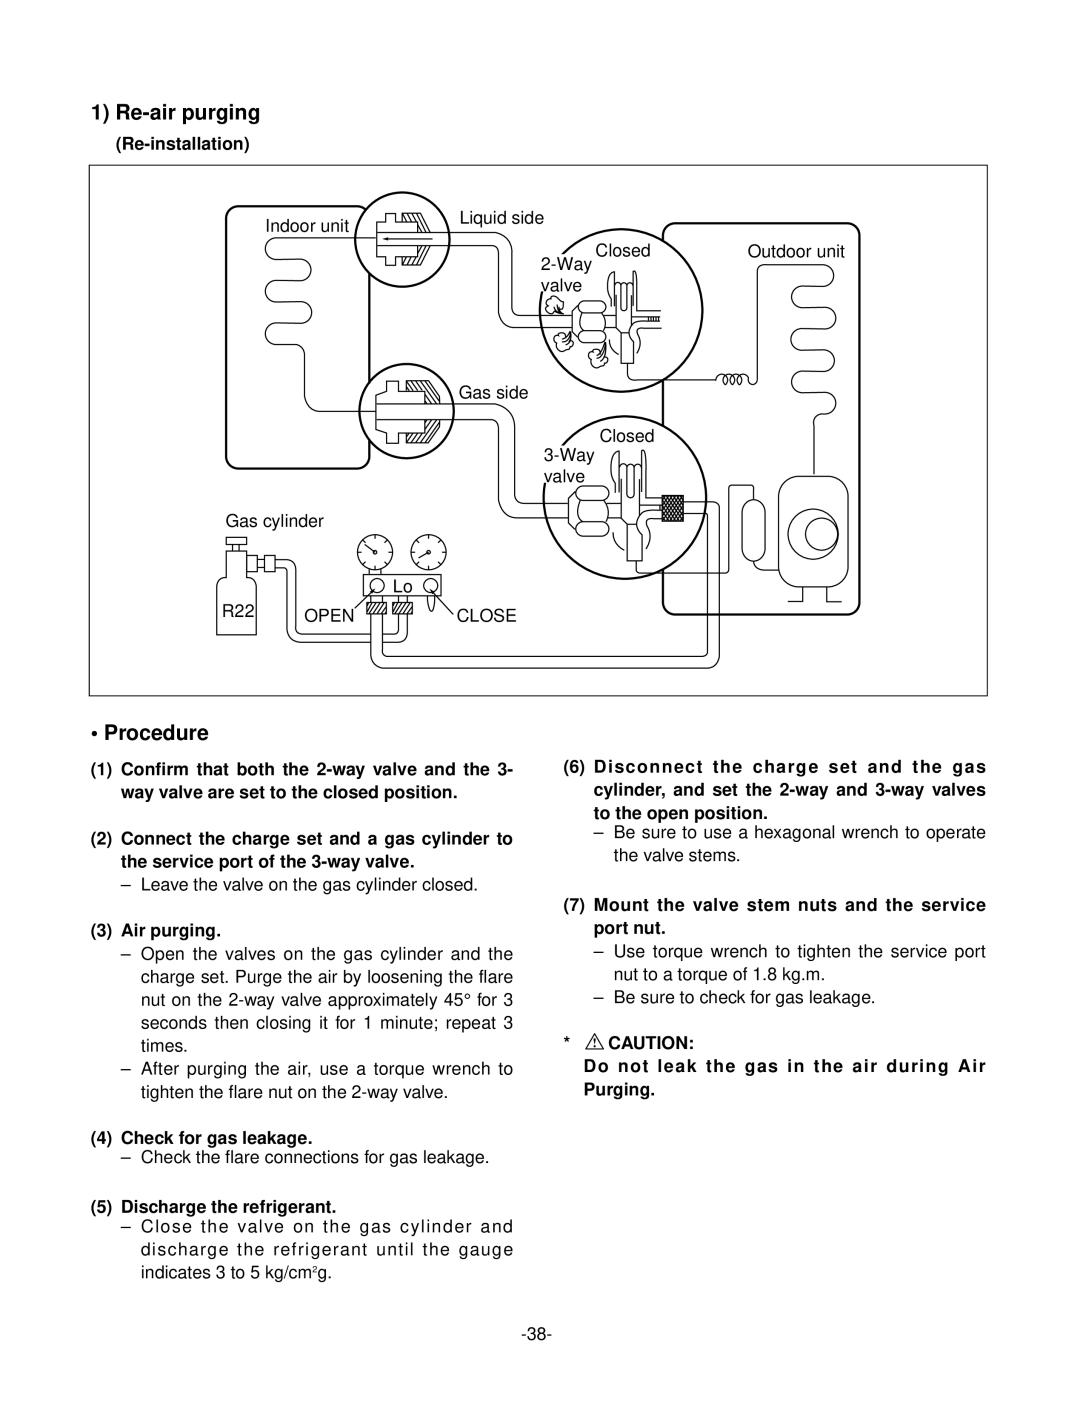 LG Electronics LSC183VMA service manual Re-air purging, Procedure, Re-installation, Air purging, Check for gas leakage 